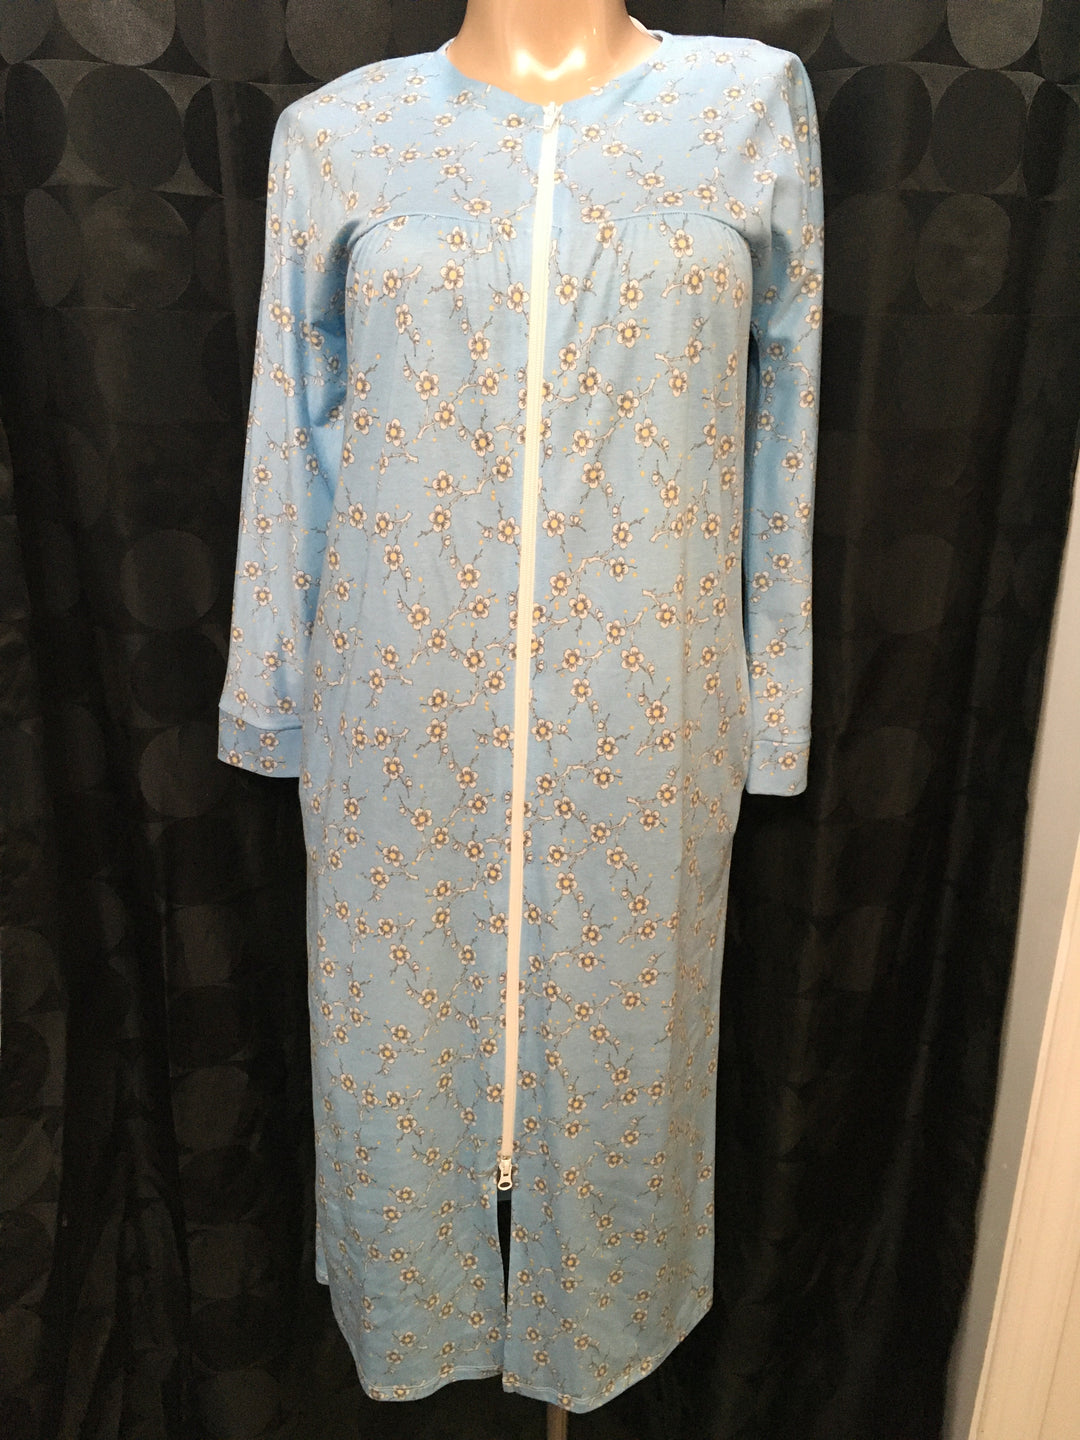 🇨🇦 Kate Zip Robe - Size Small